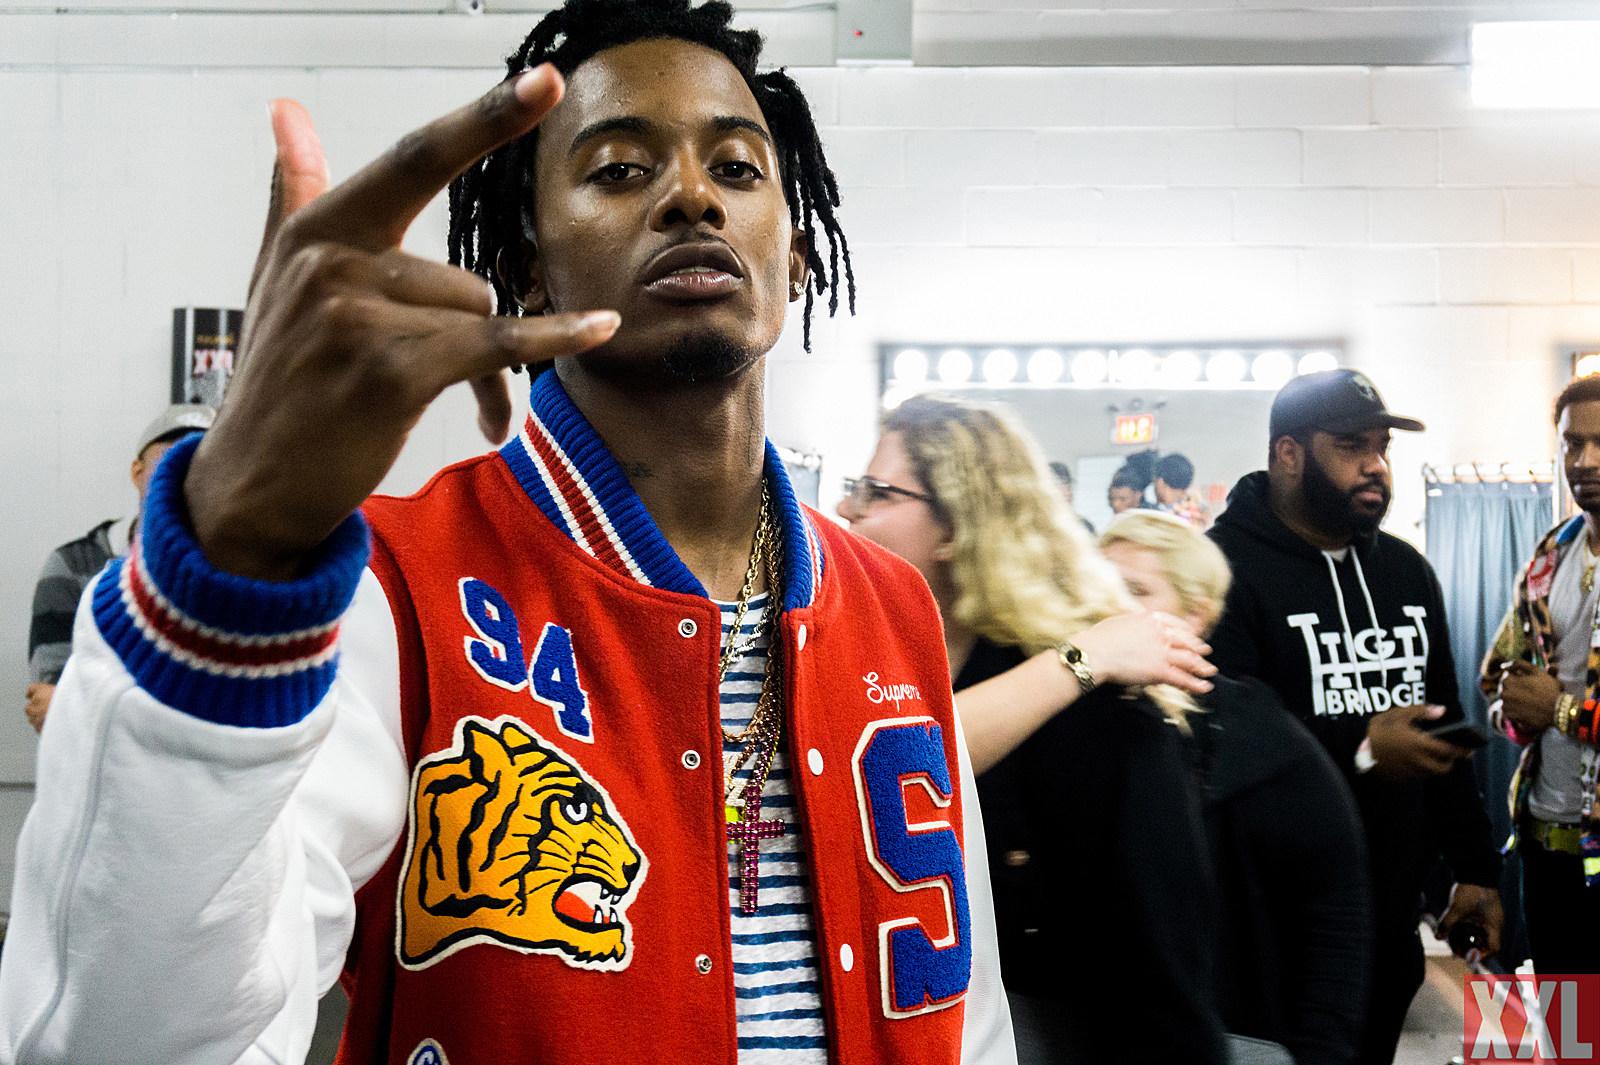 Playboi Carti Cleared of Battery Charges